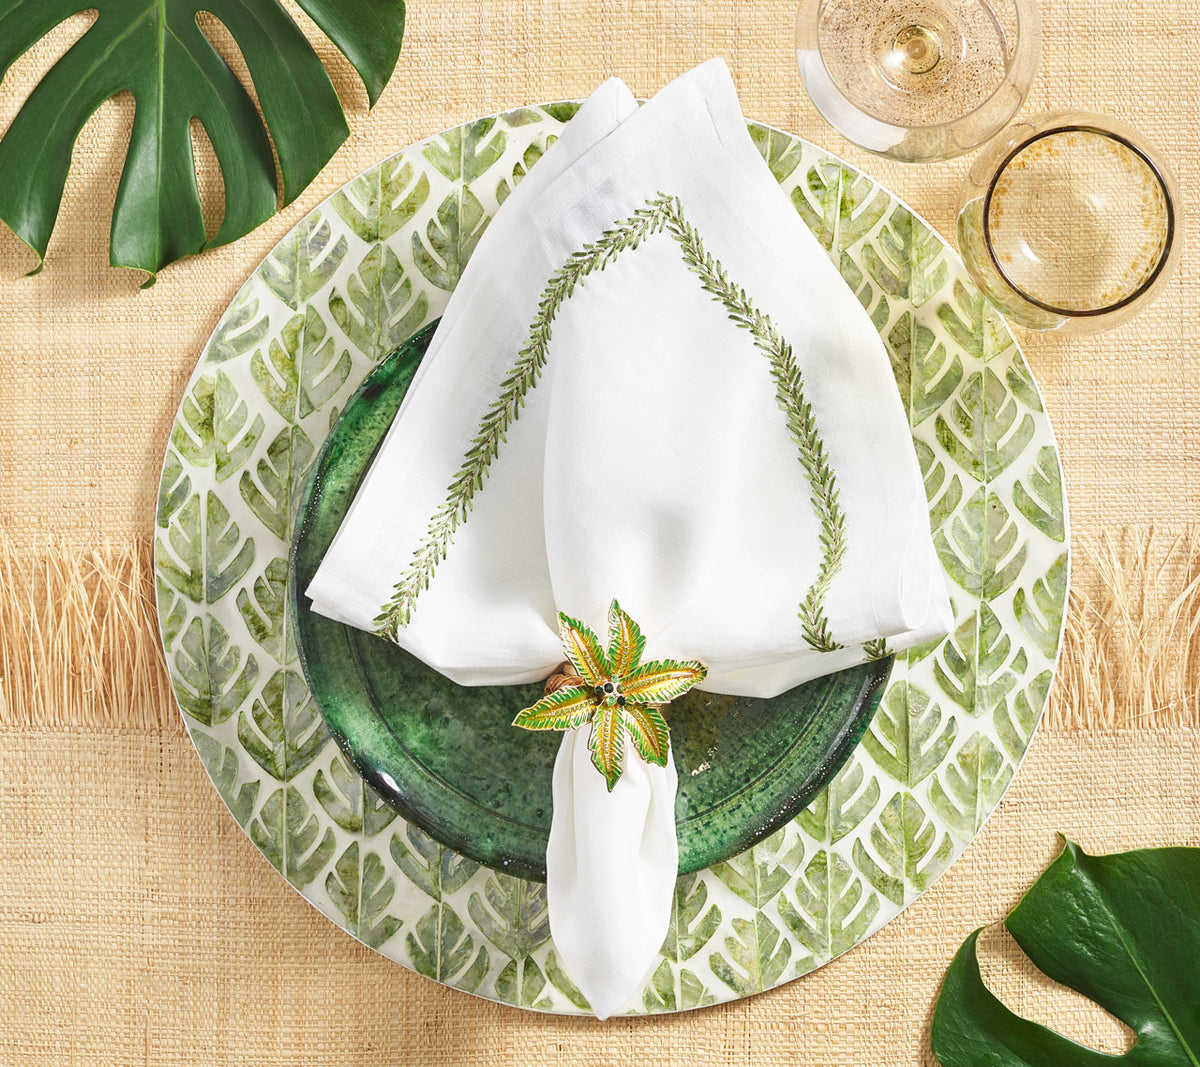 Green & Gold Palm Coast Napkin Ring holding a white napkin on top of a palm-inspired placemat